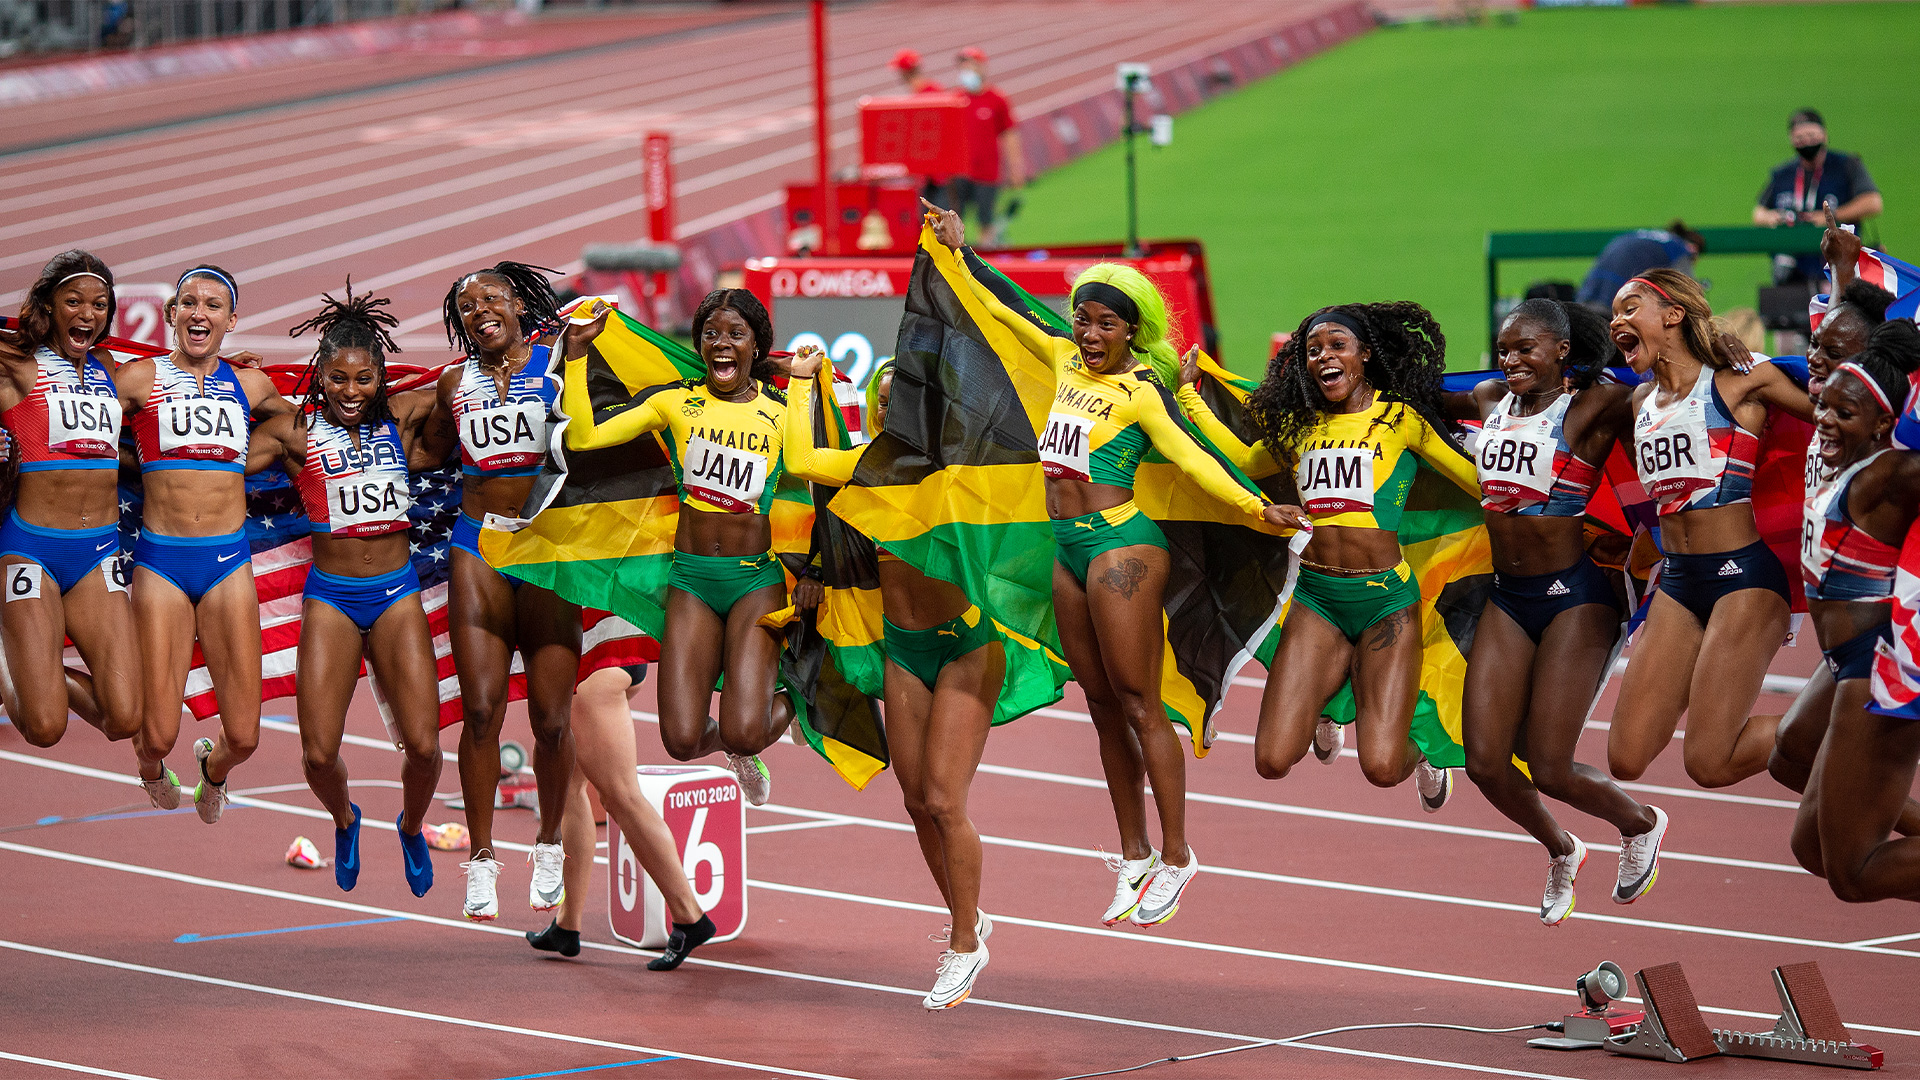 Jamaica, Great Britain and USA womens sprint teams celebrating together